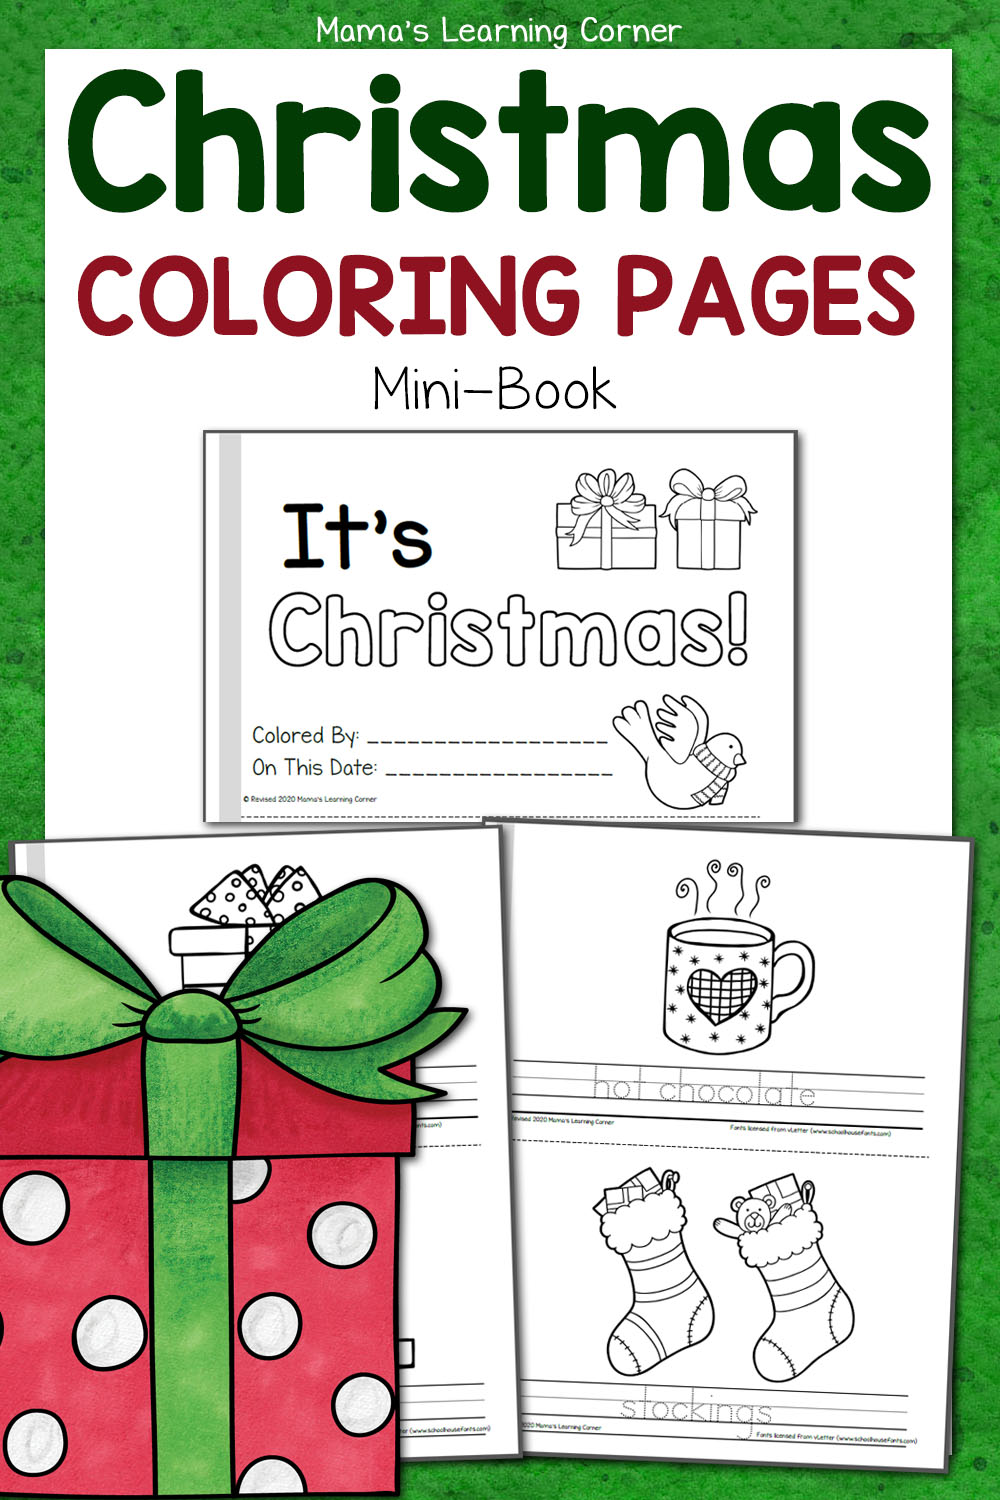 https://www.mamaslearningcorner.com/wp-content/uploads/2020/11/Christmas-Coloring-Pages-Revised.jpg